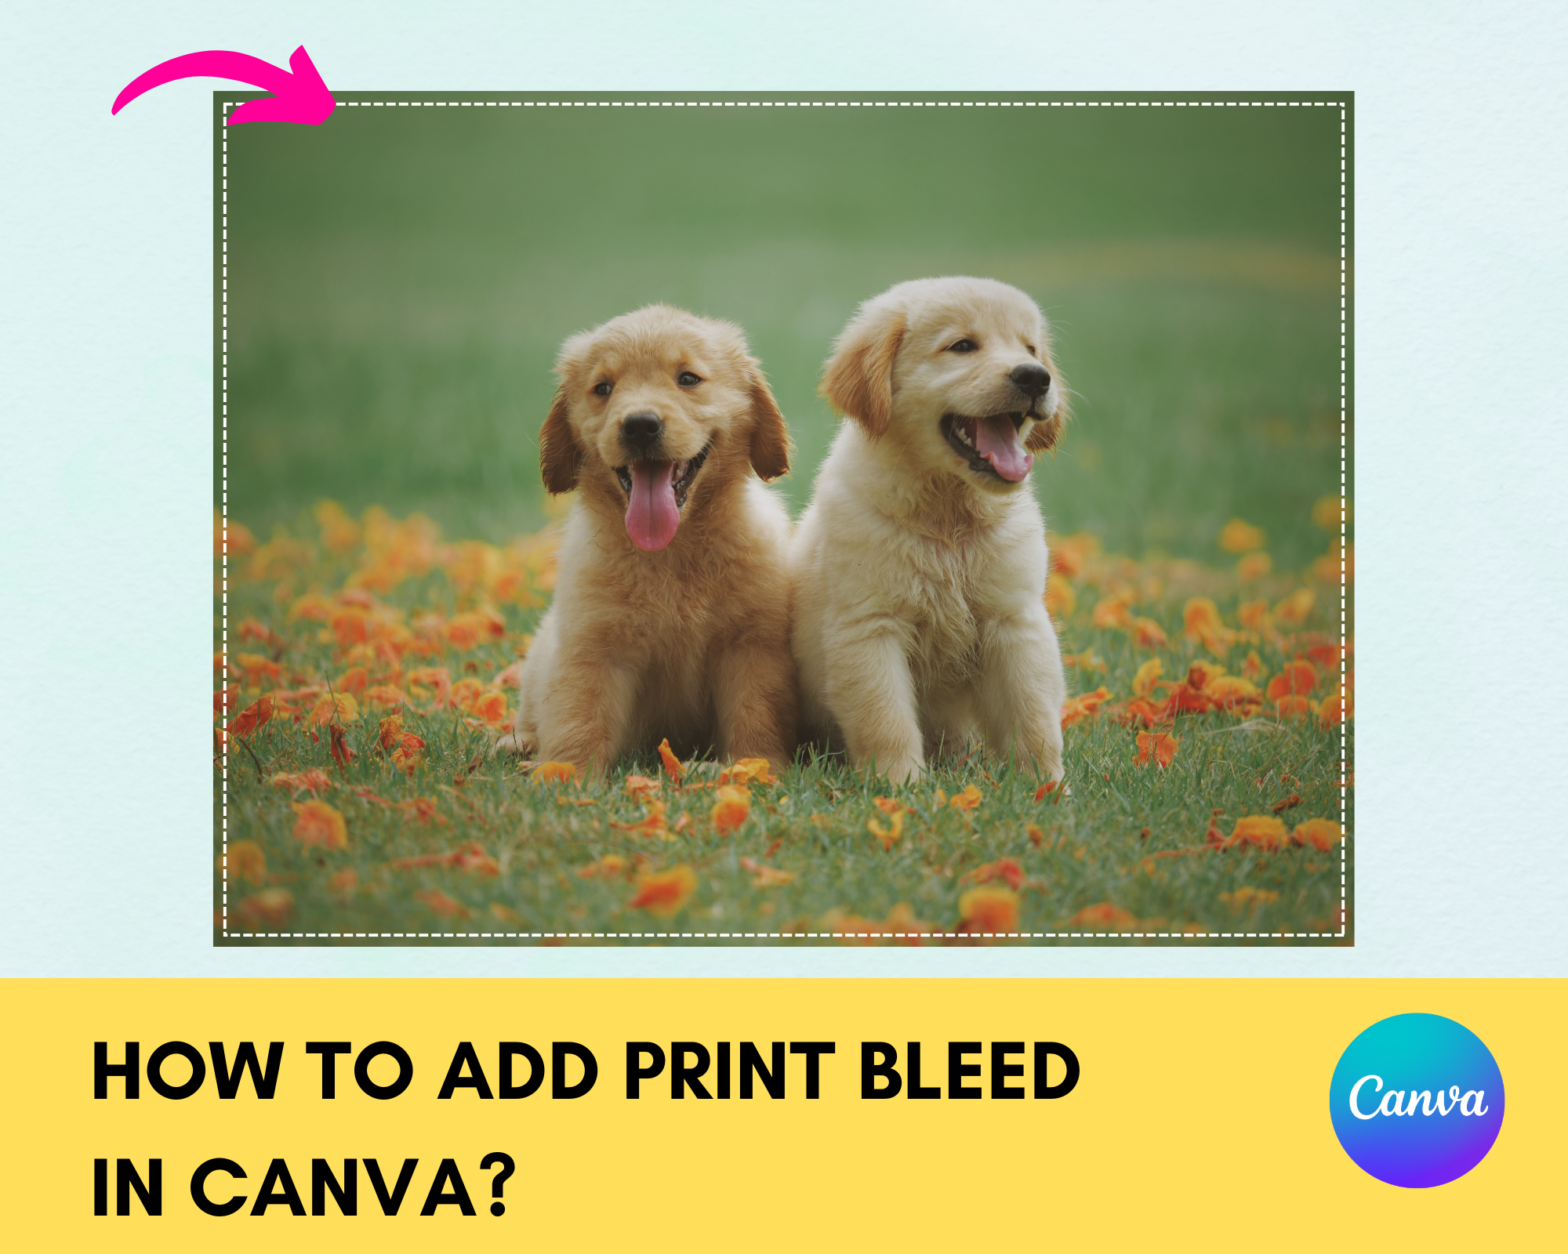 How to Add Bleed in Canva - Step-by-Step Guide"